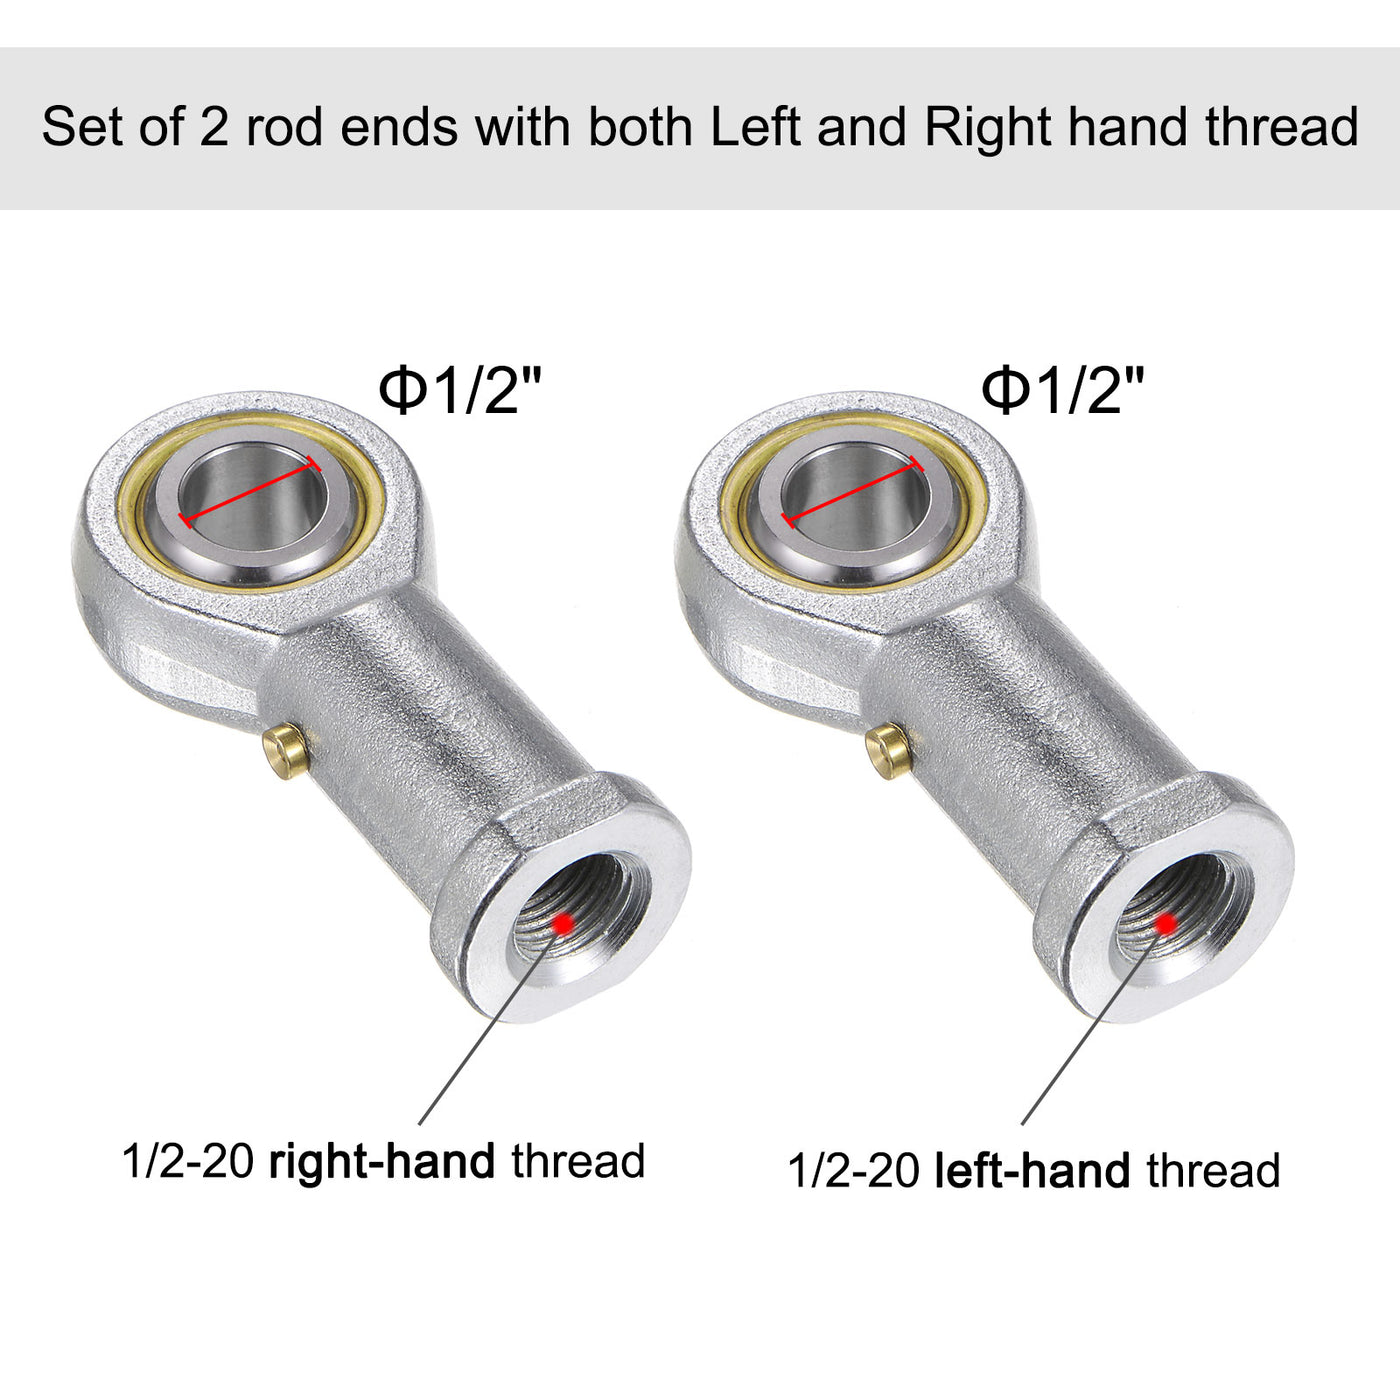 uxcell Uxcell PHSB8 1/2" Female Rod End Set - 2pcs of 1/2-20 Left & Right Thread with Jam Nut